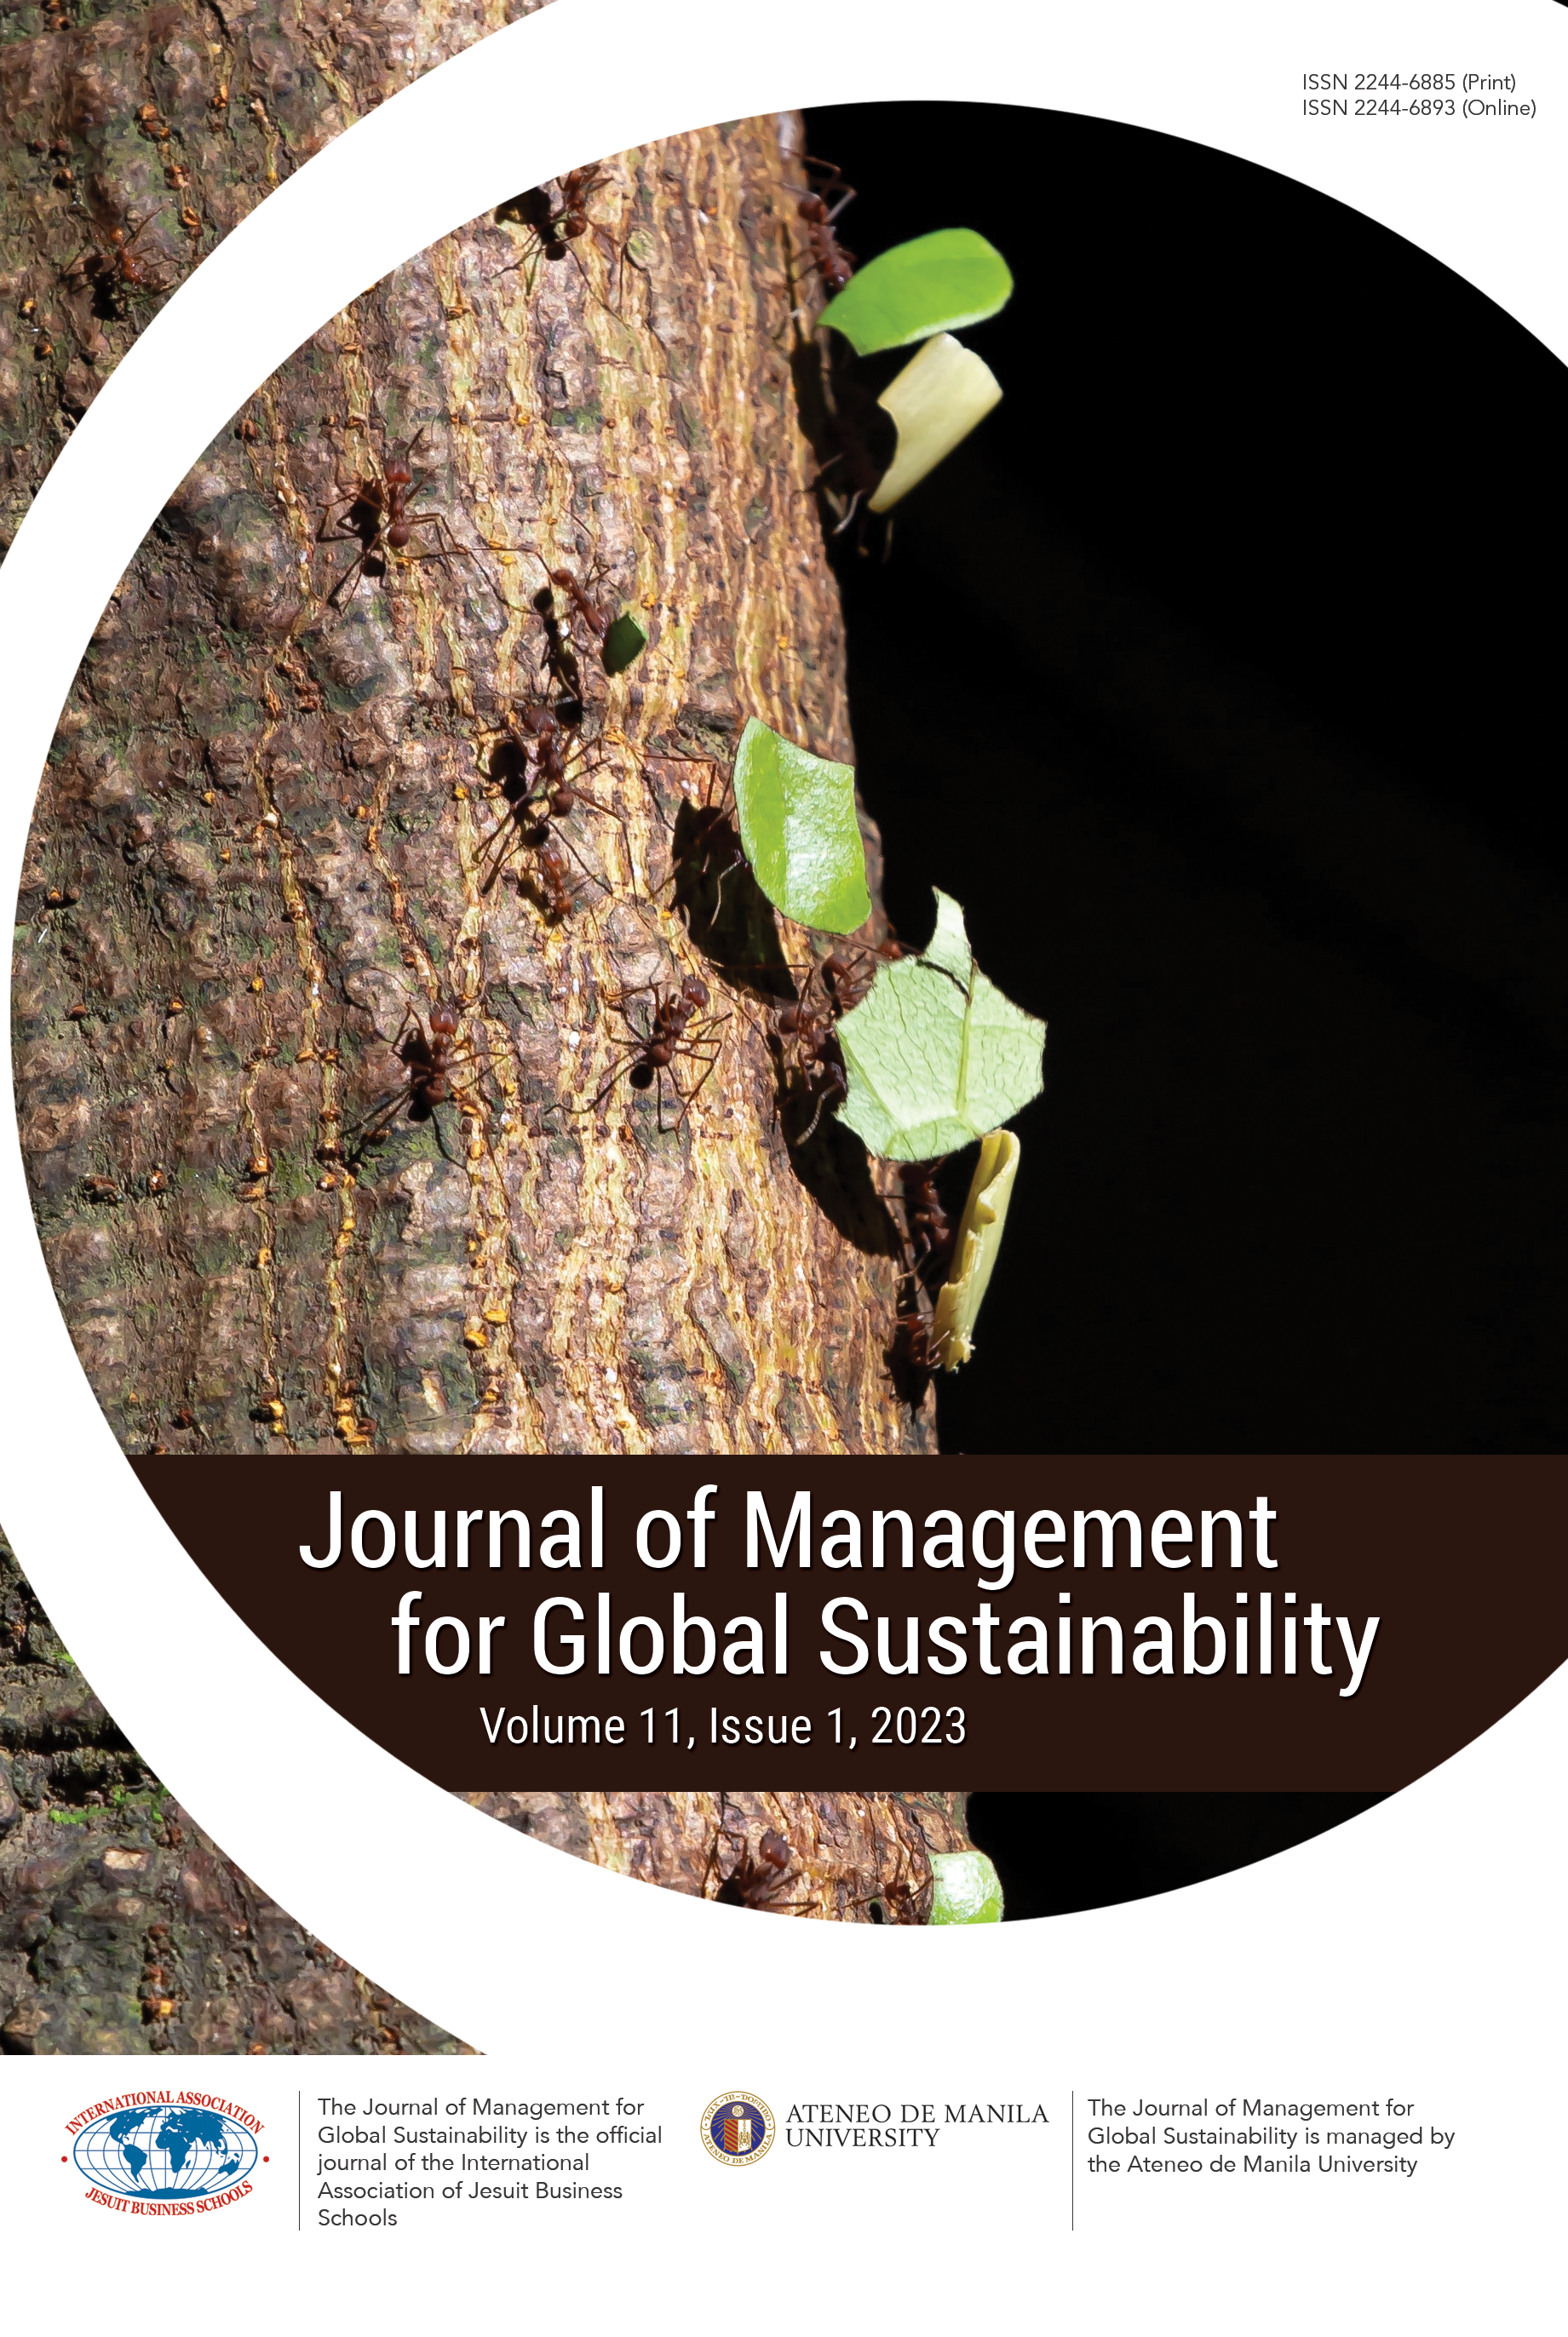 Journal of Management for Global Sustainability Image